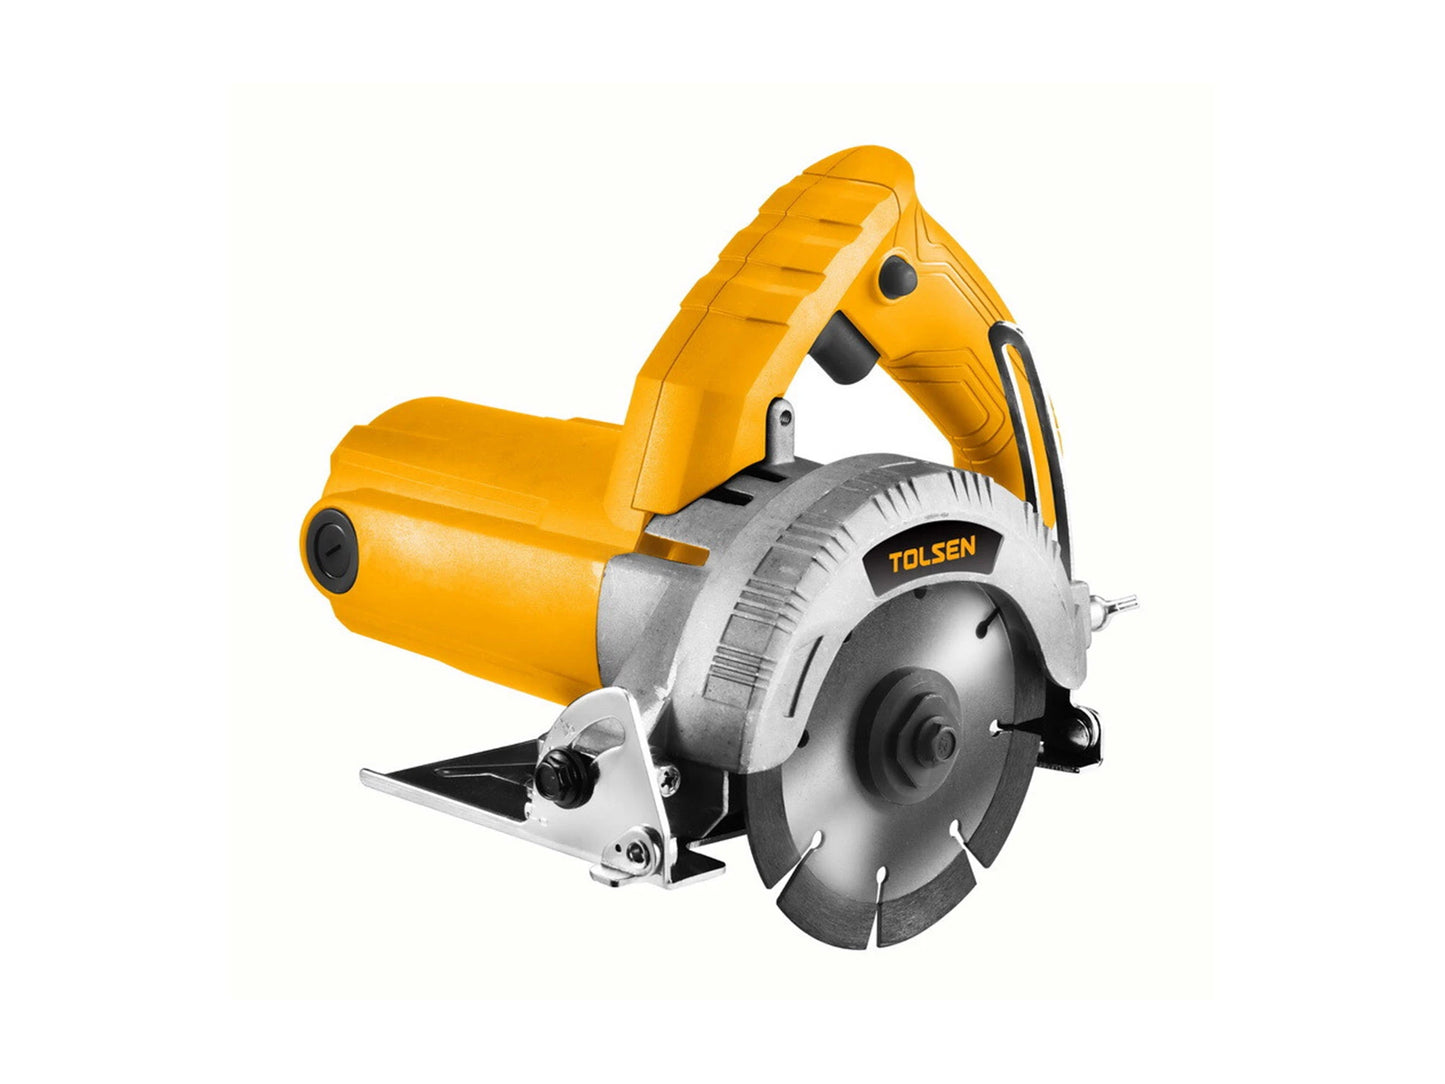 (INDUSTRIAL) MARBLE CUTTER 1450W